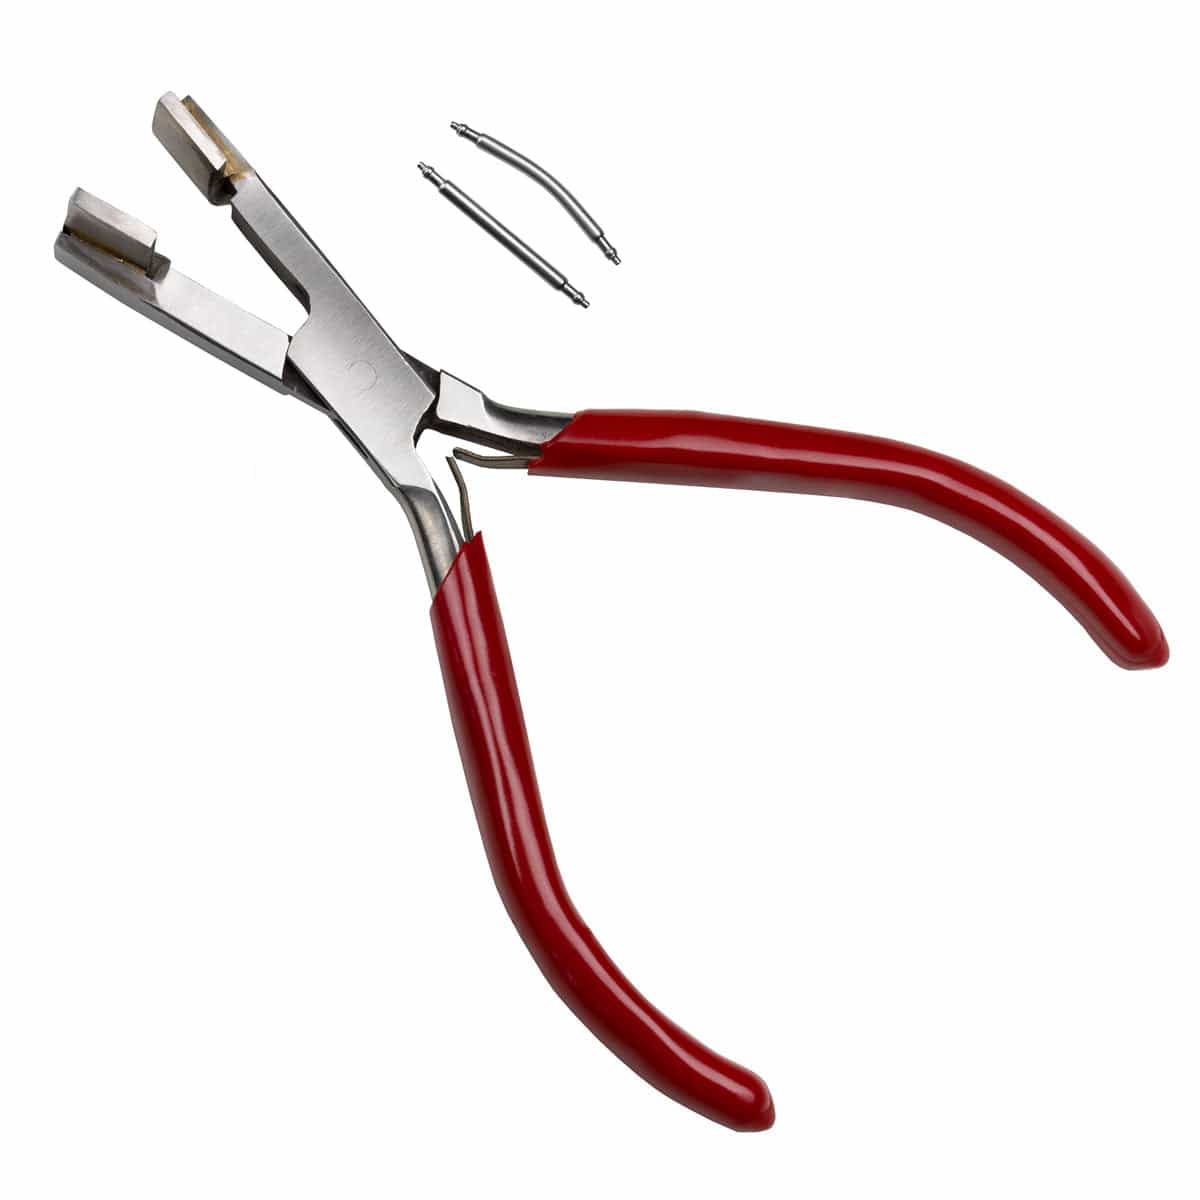 Pliers for Curving Spring Bars